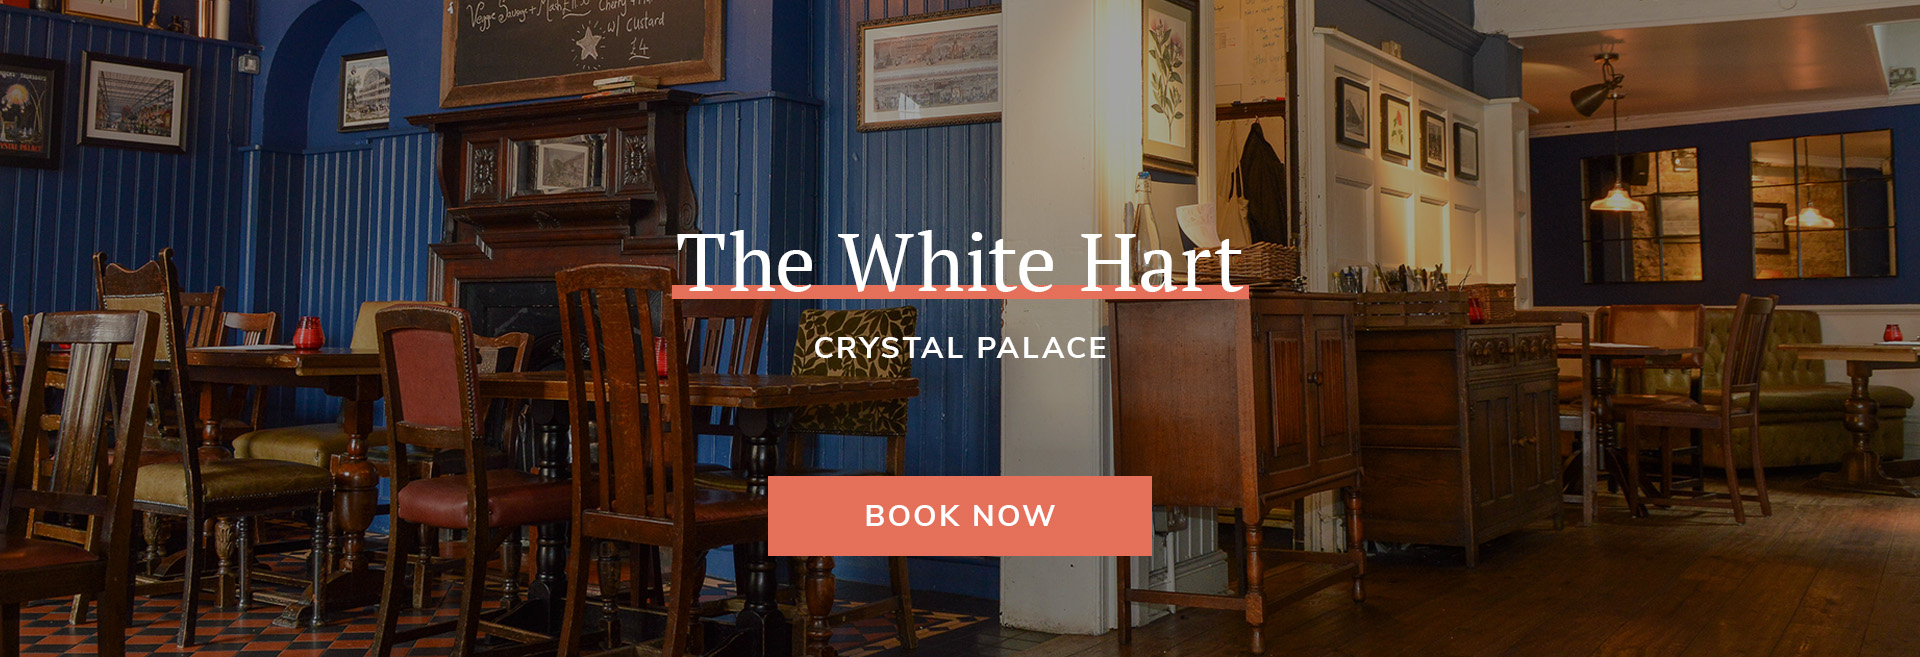 The White Hart Crystal Palace Banner 3